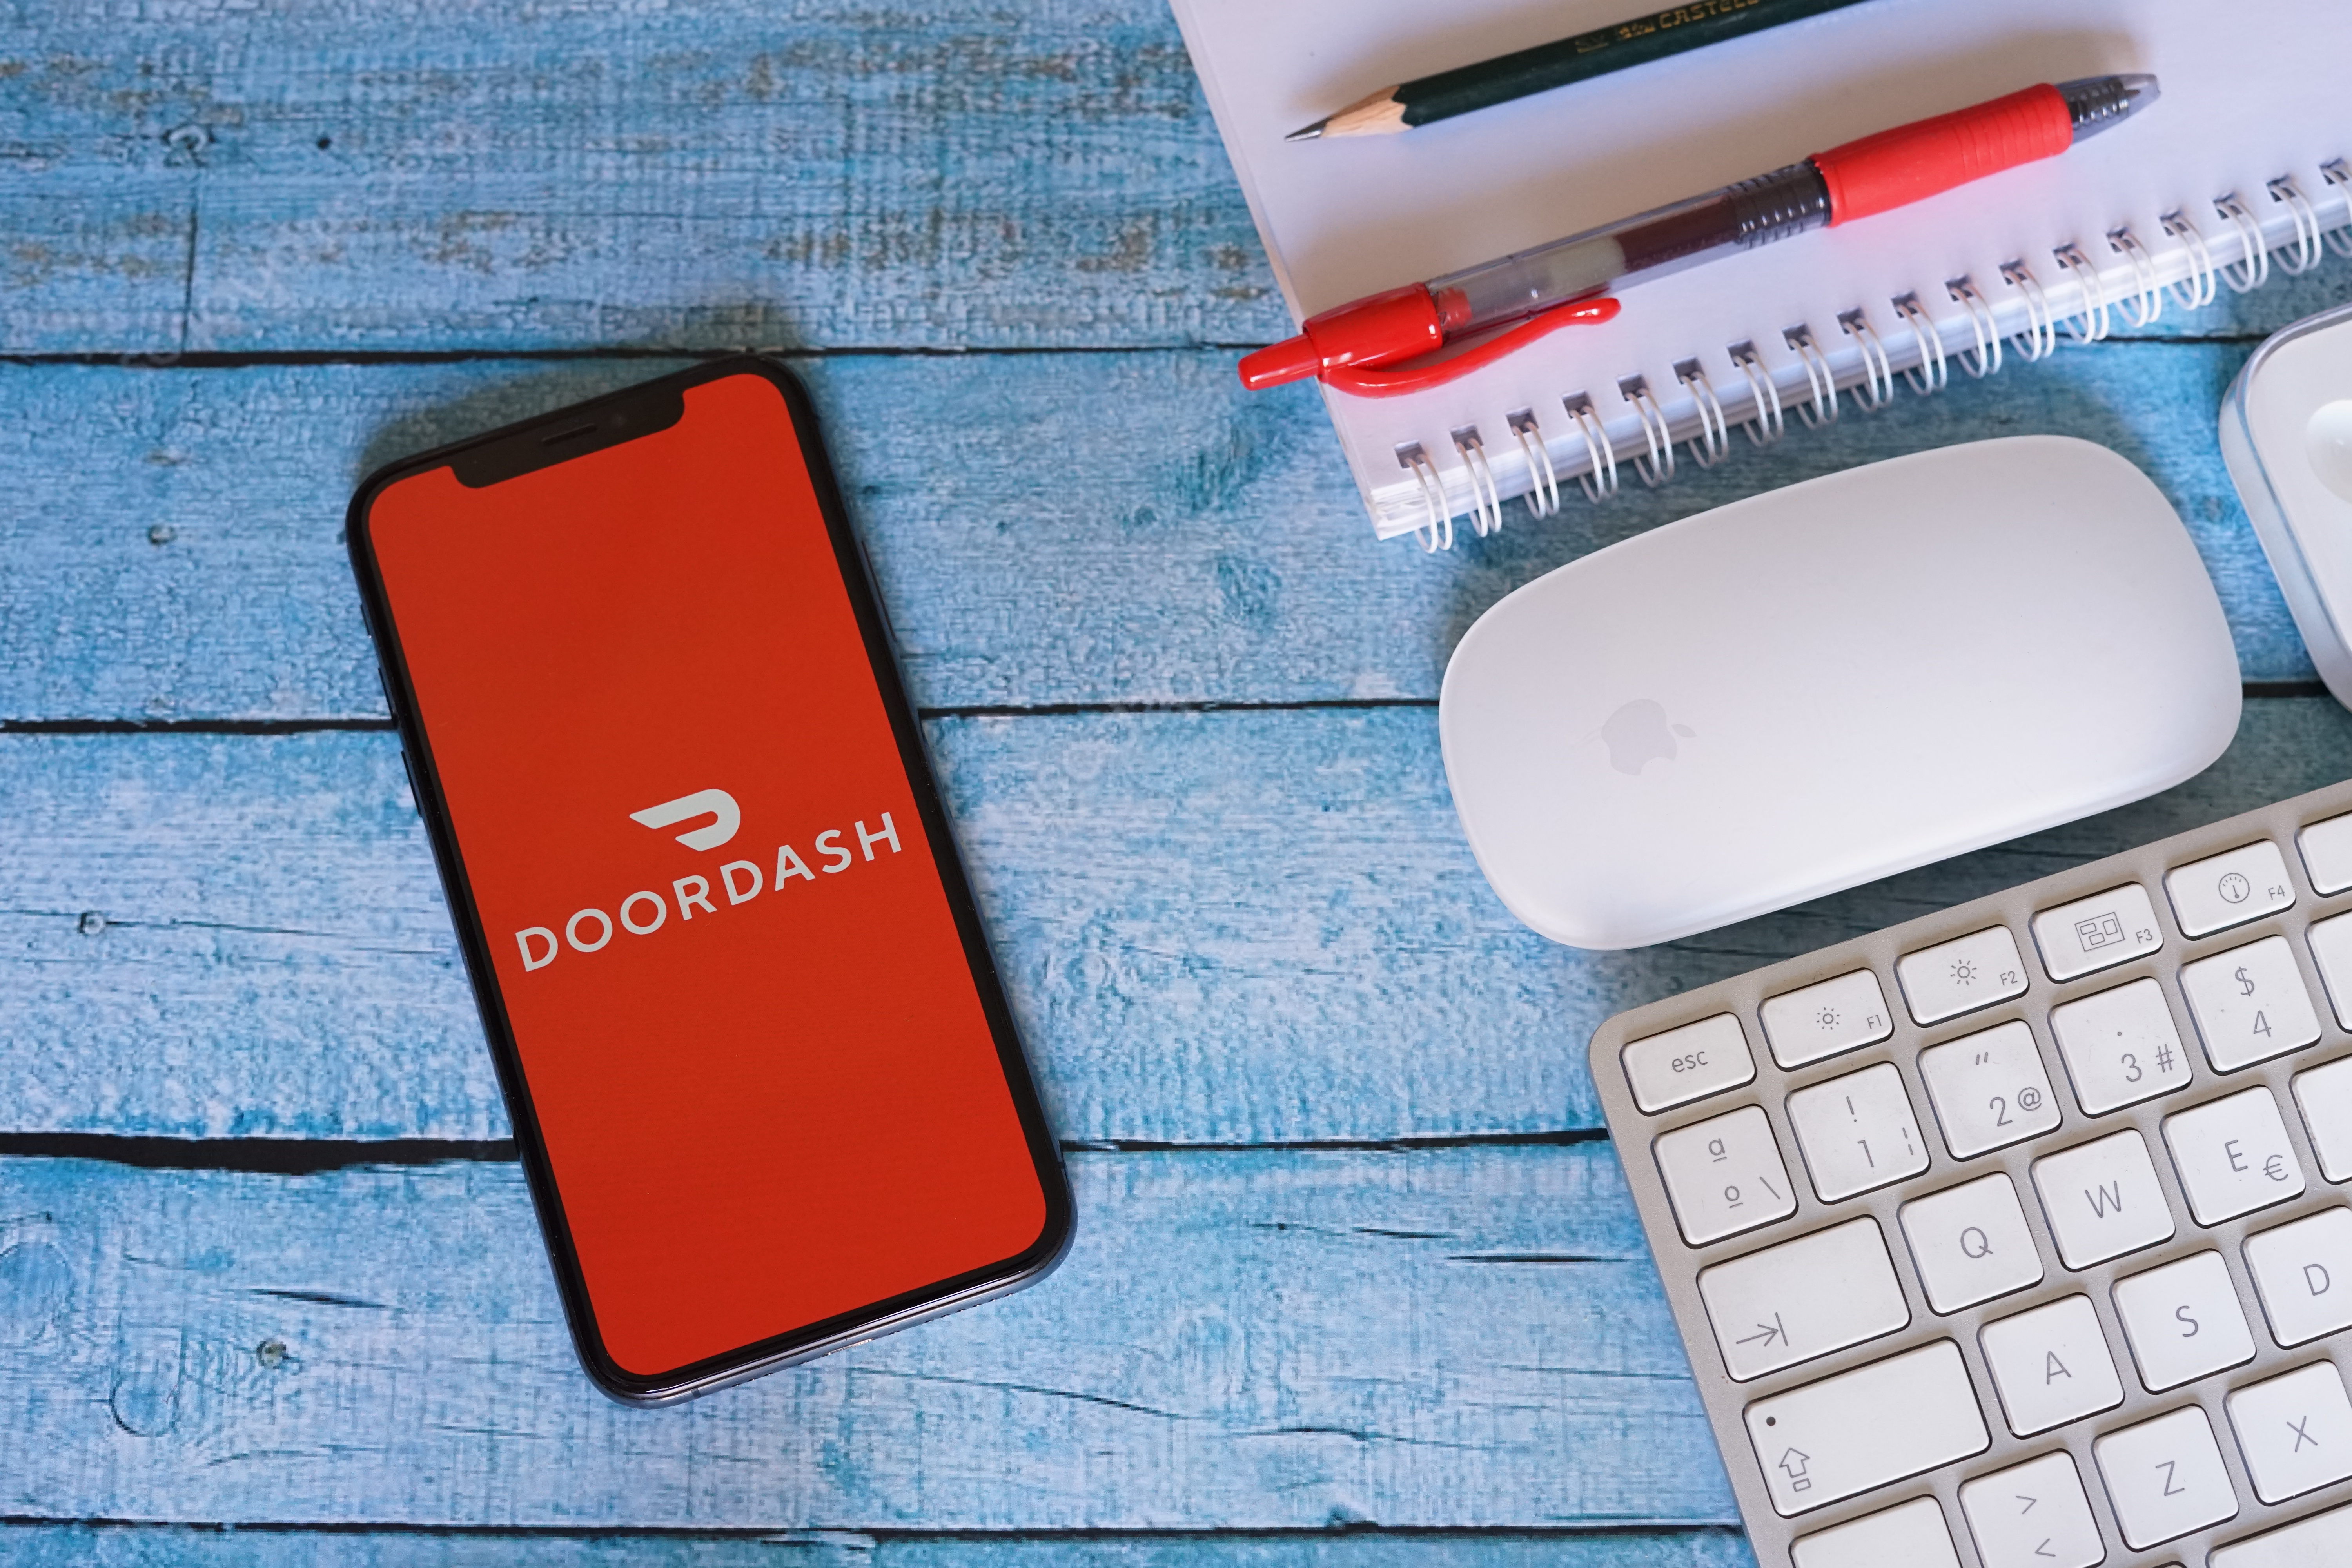 A cell phone showing the DoorDash app sits on a table next to a mouse, keyboard, and notebook.